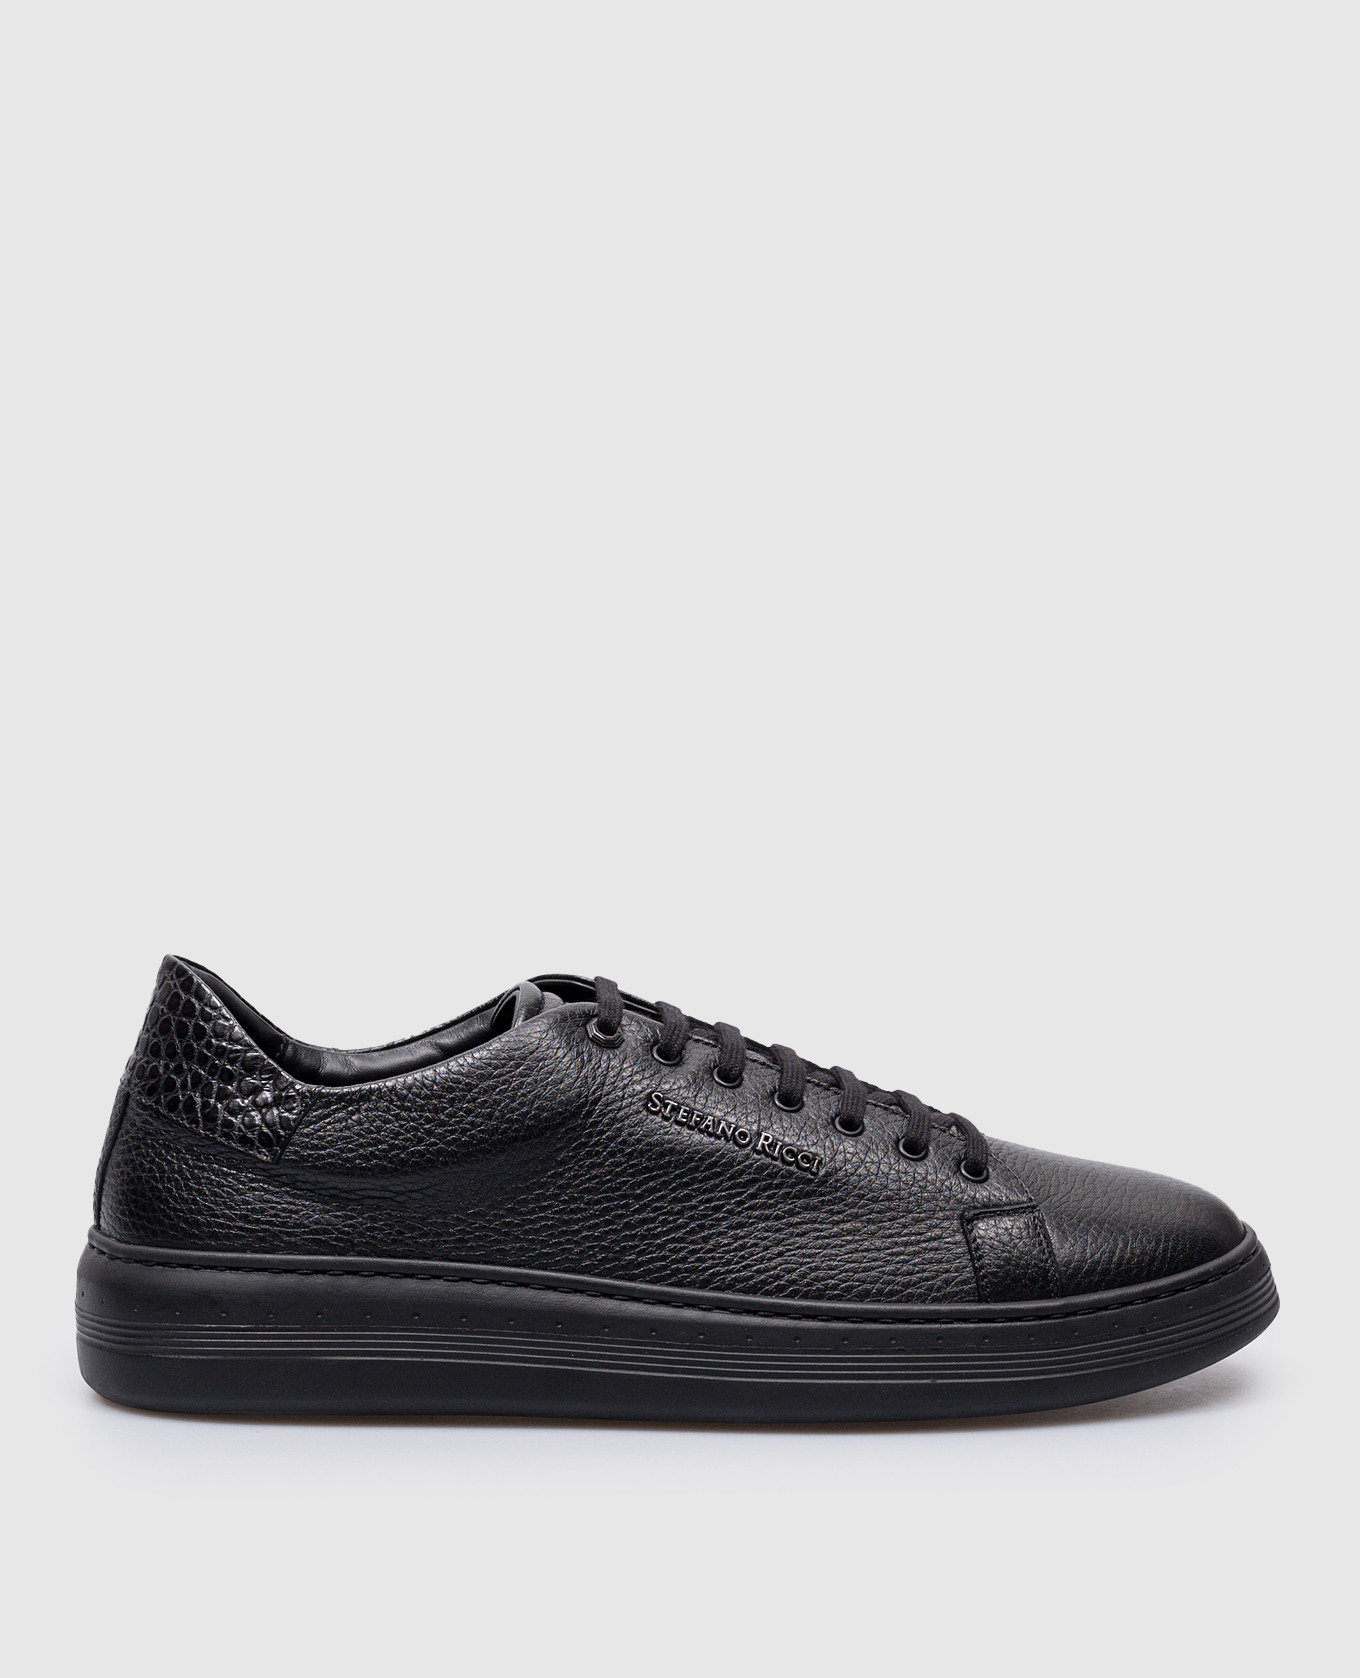 Black crocodile leather sneakers with logo